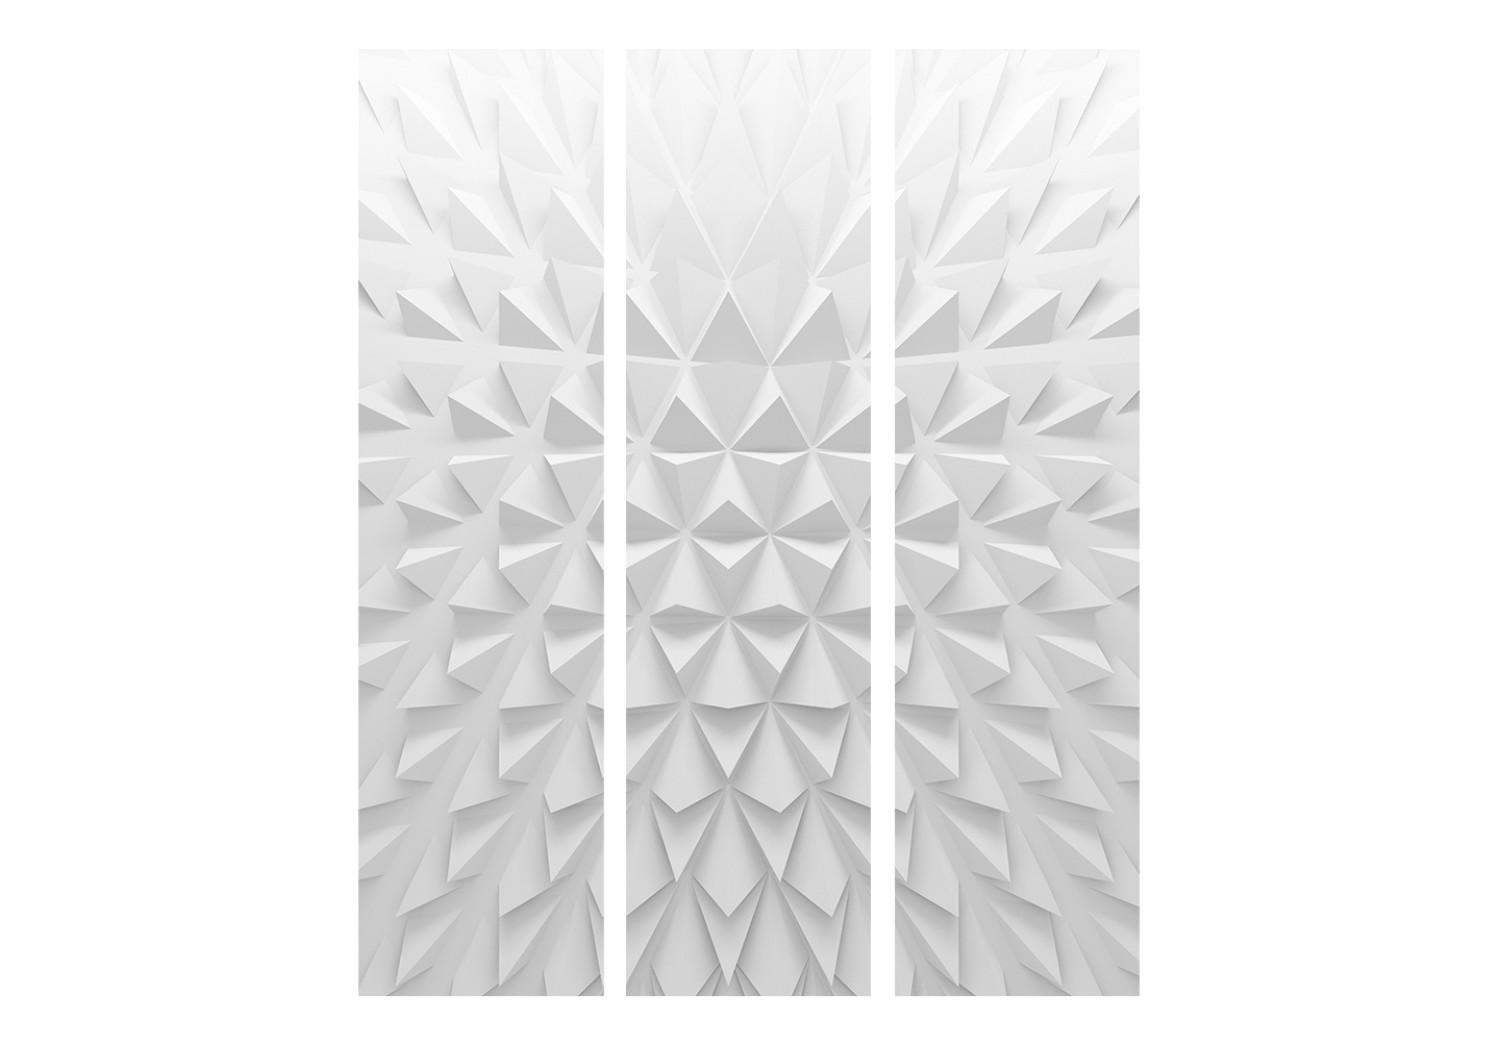 Room Divider Fortress of Illusions (3-piece) - geometric 3D abstract